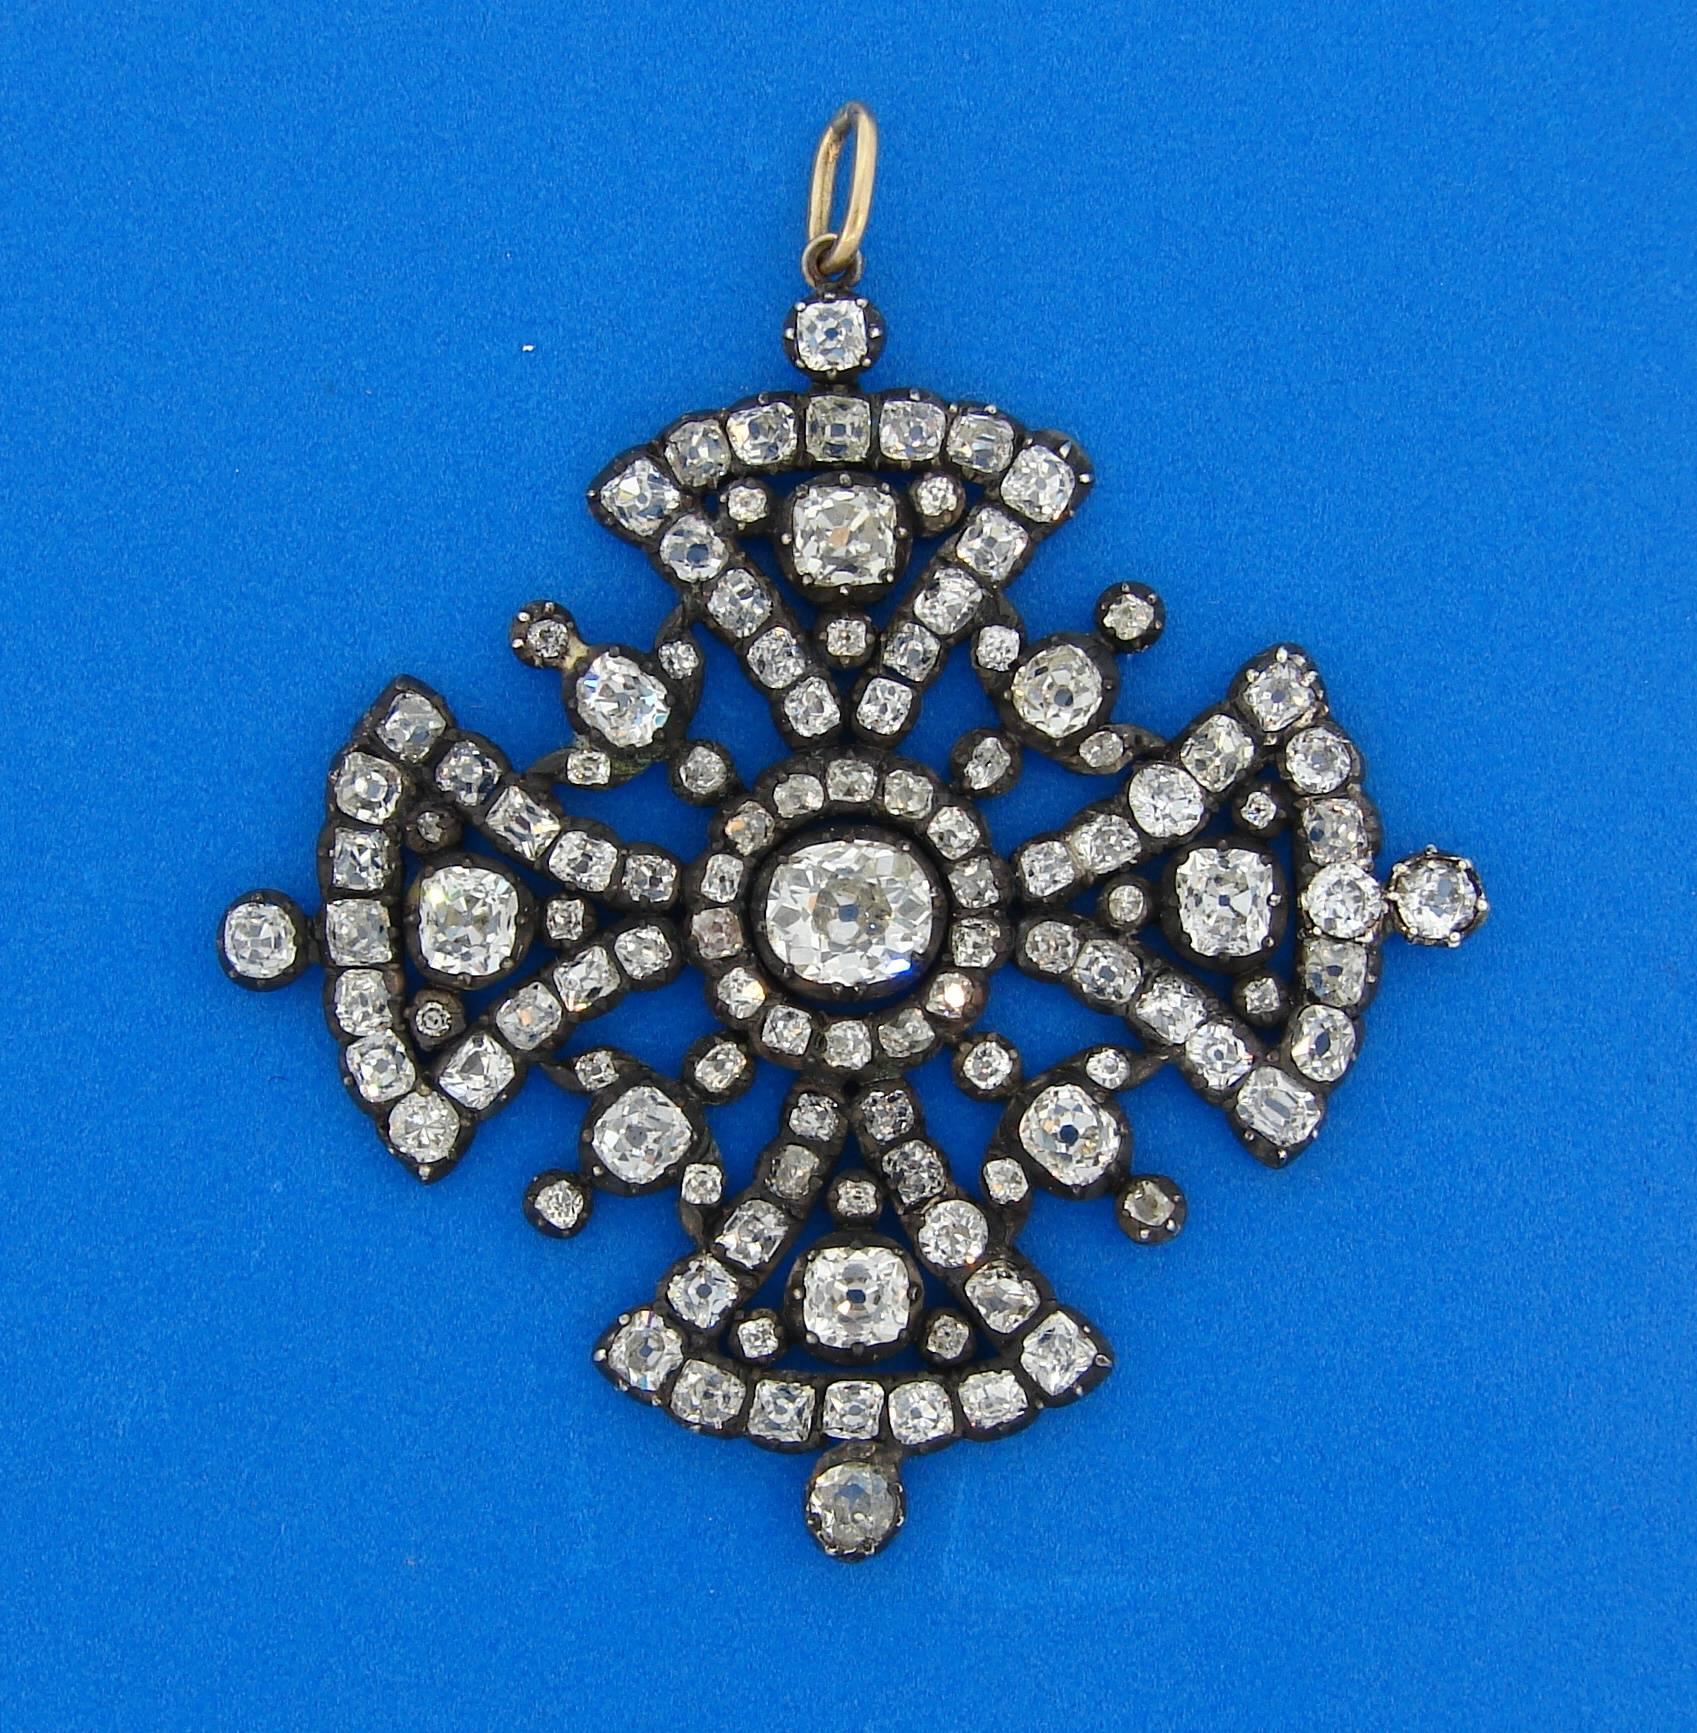 Beautiful Georgian diamond Maltese cross pendant that is a perfect gift for the holidays. It is made of silver and 14 karat (tested) yellow gold and set with old mine cut diamonds. Center diamond is approximately 1.23 carats, diamond total weight is